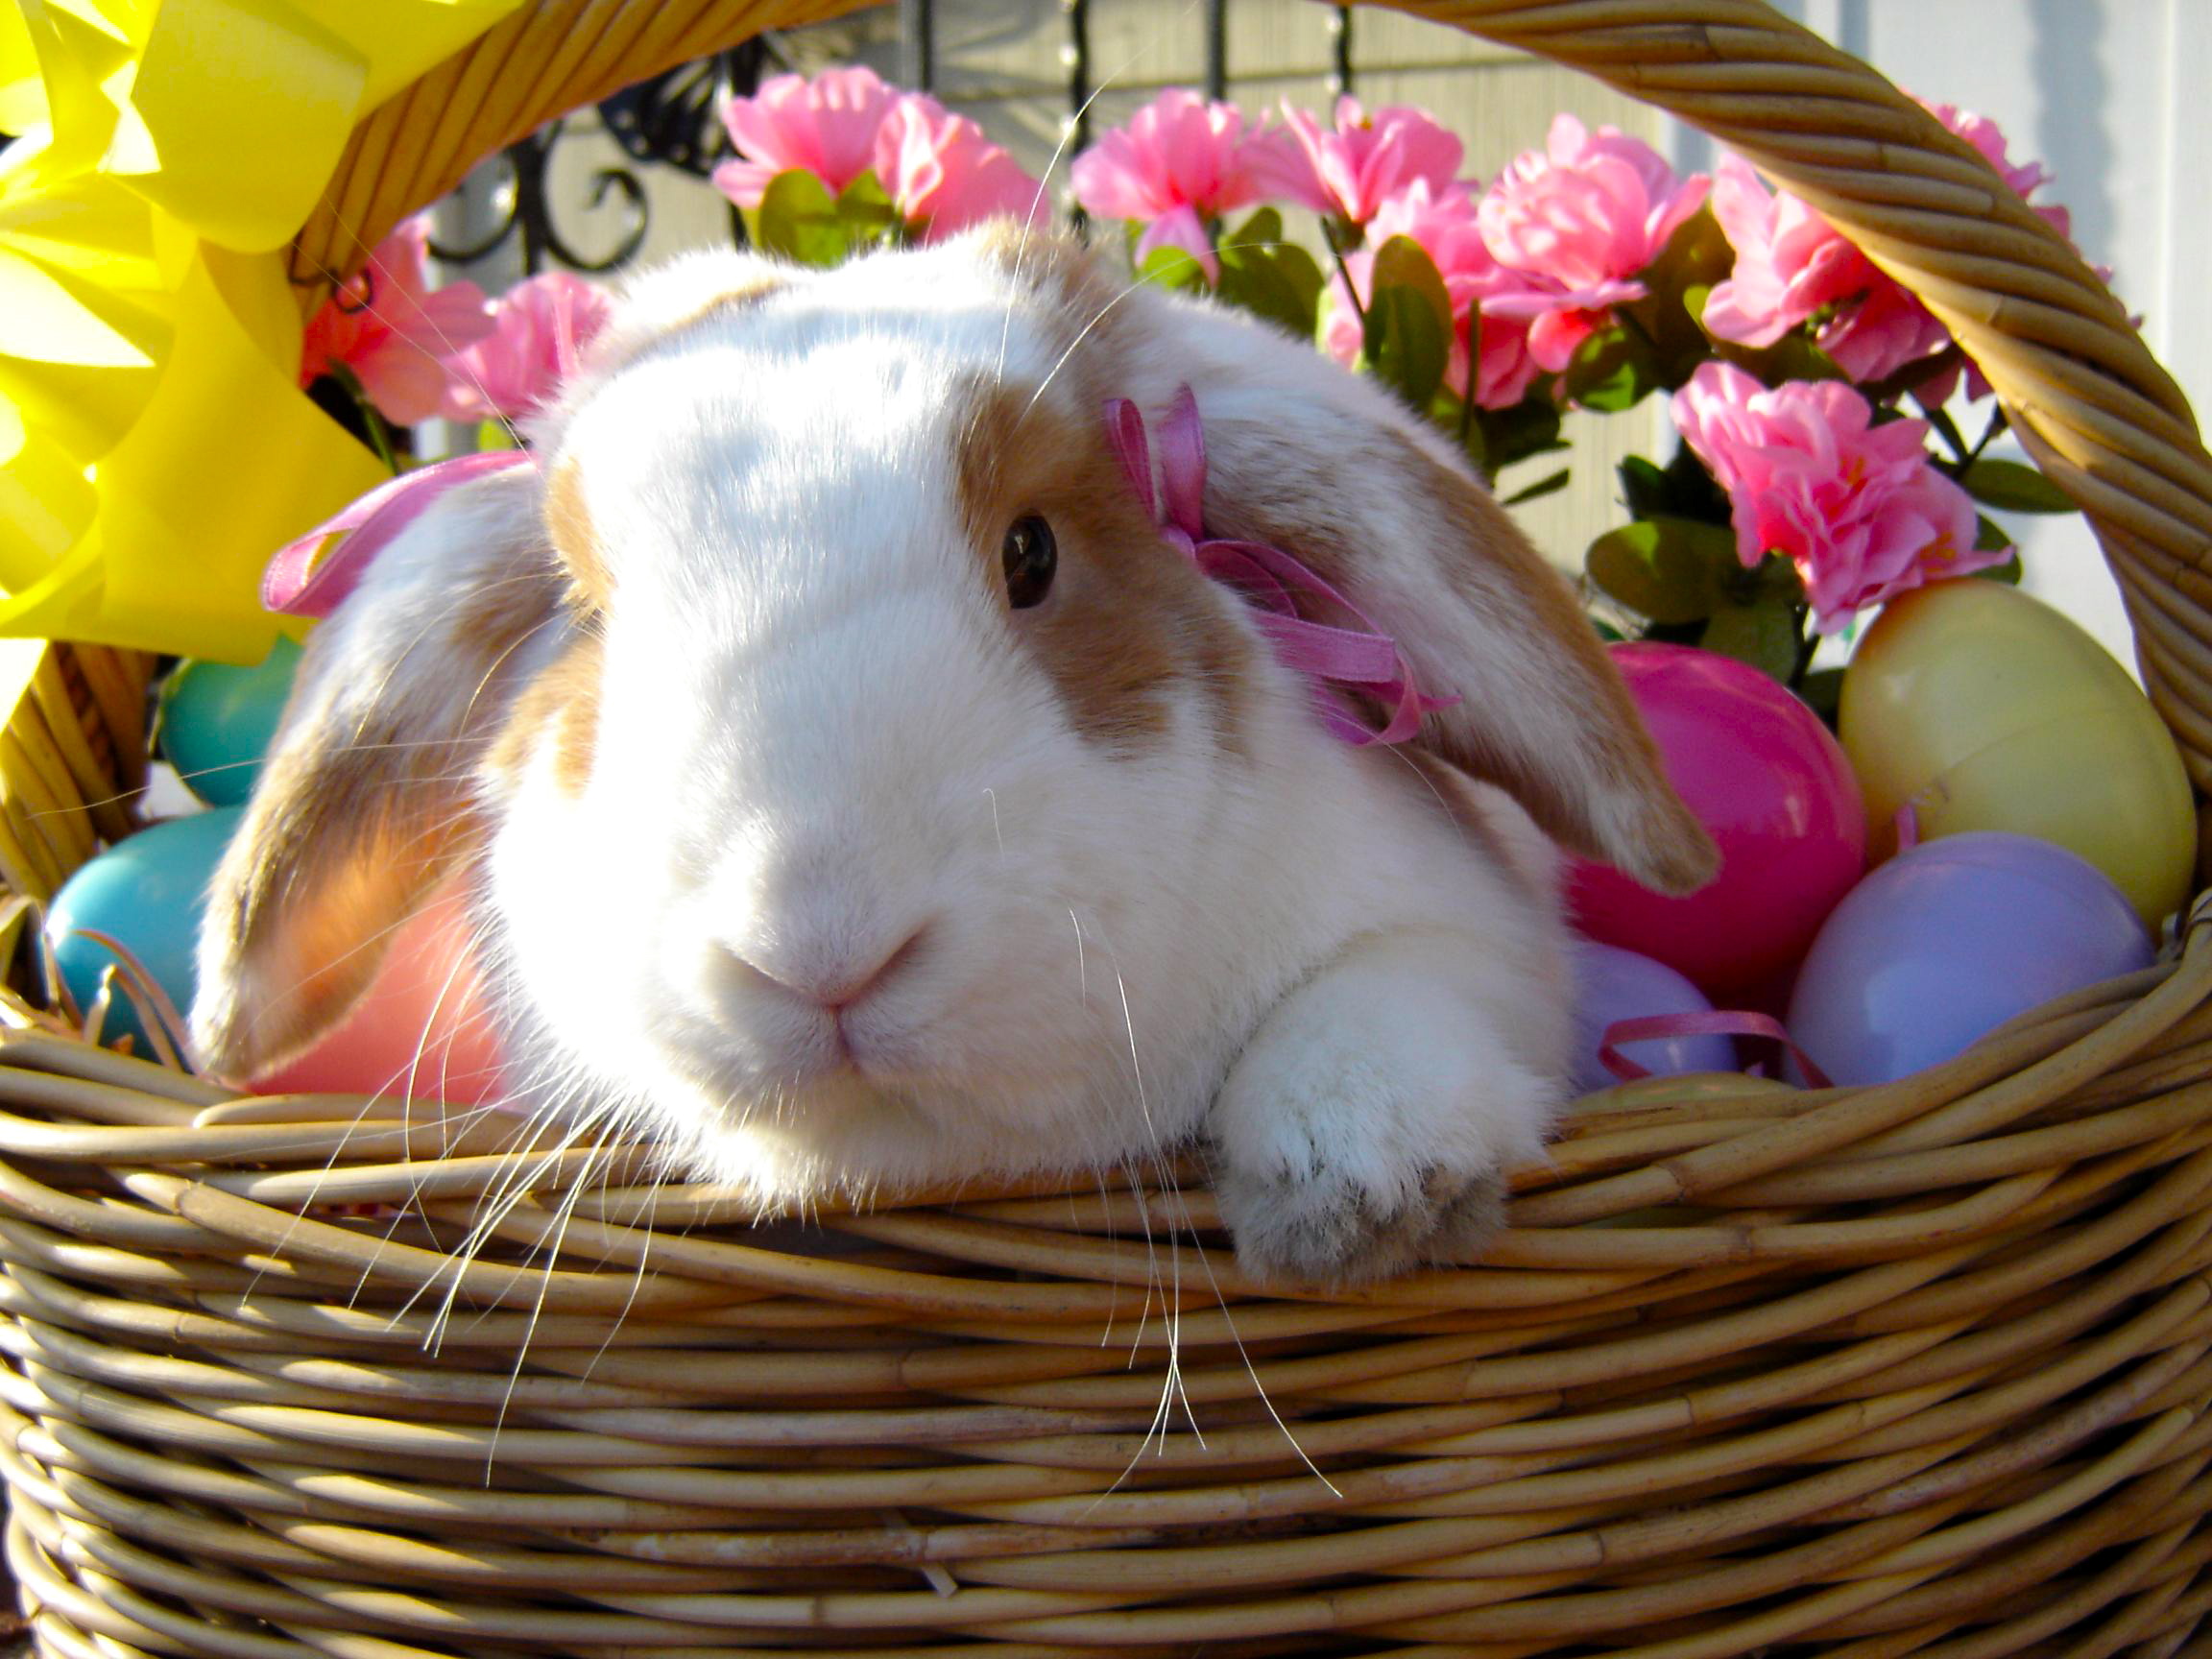 Bunny in an Easter Basket in the Sunshine